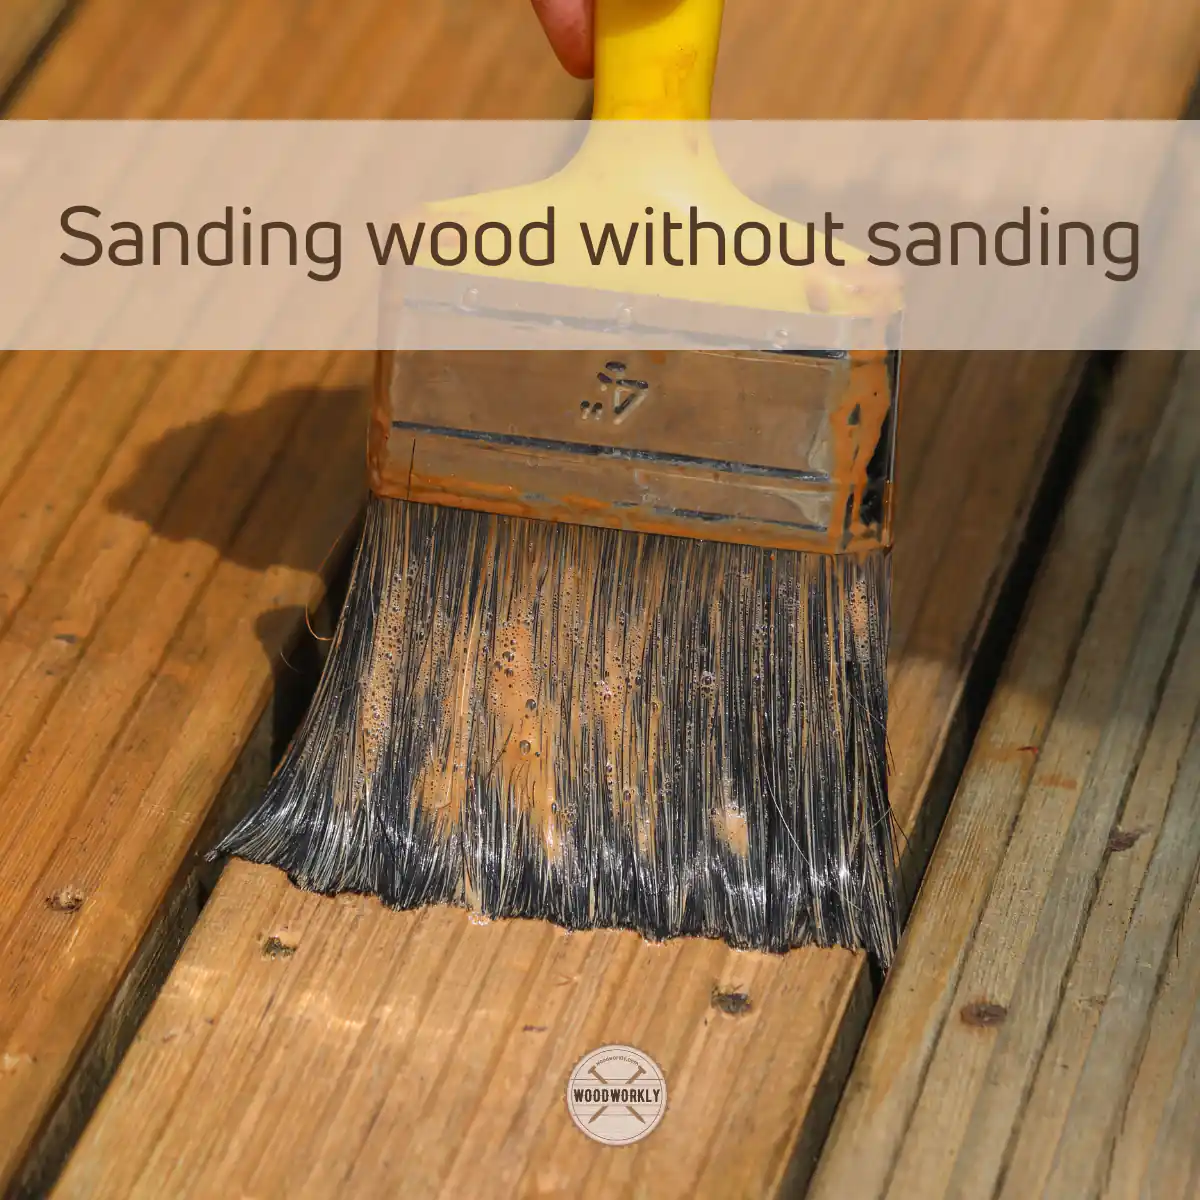 Sanding wood without sanding